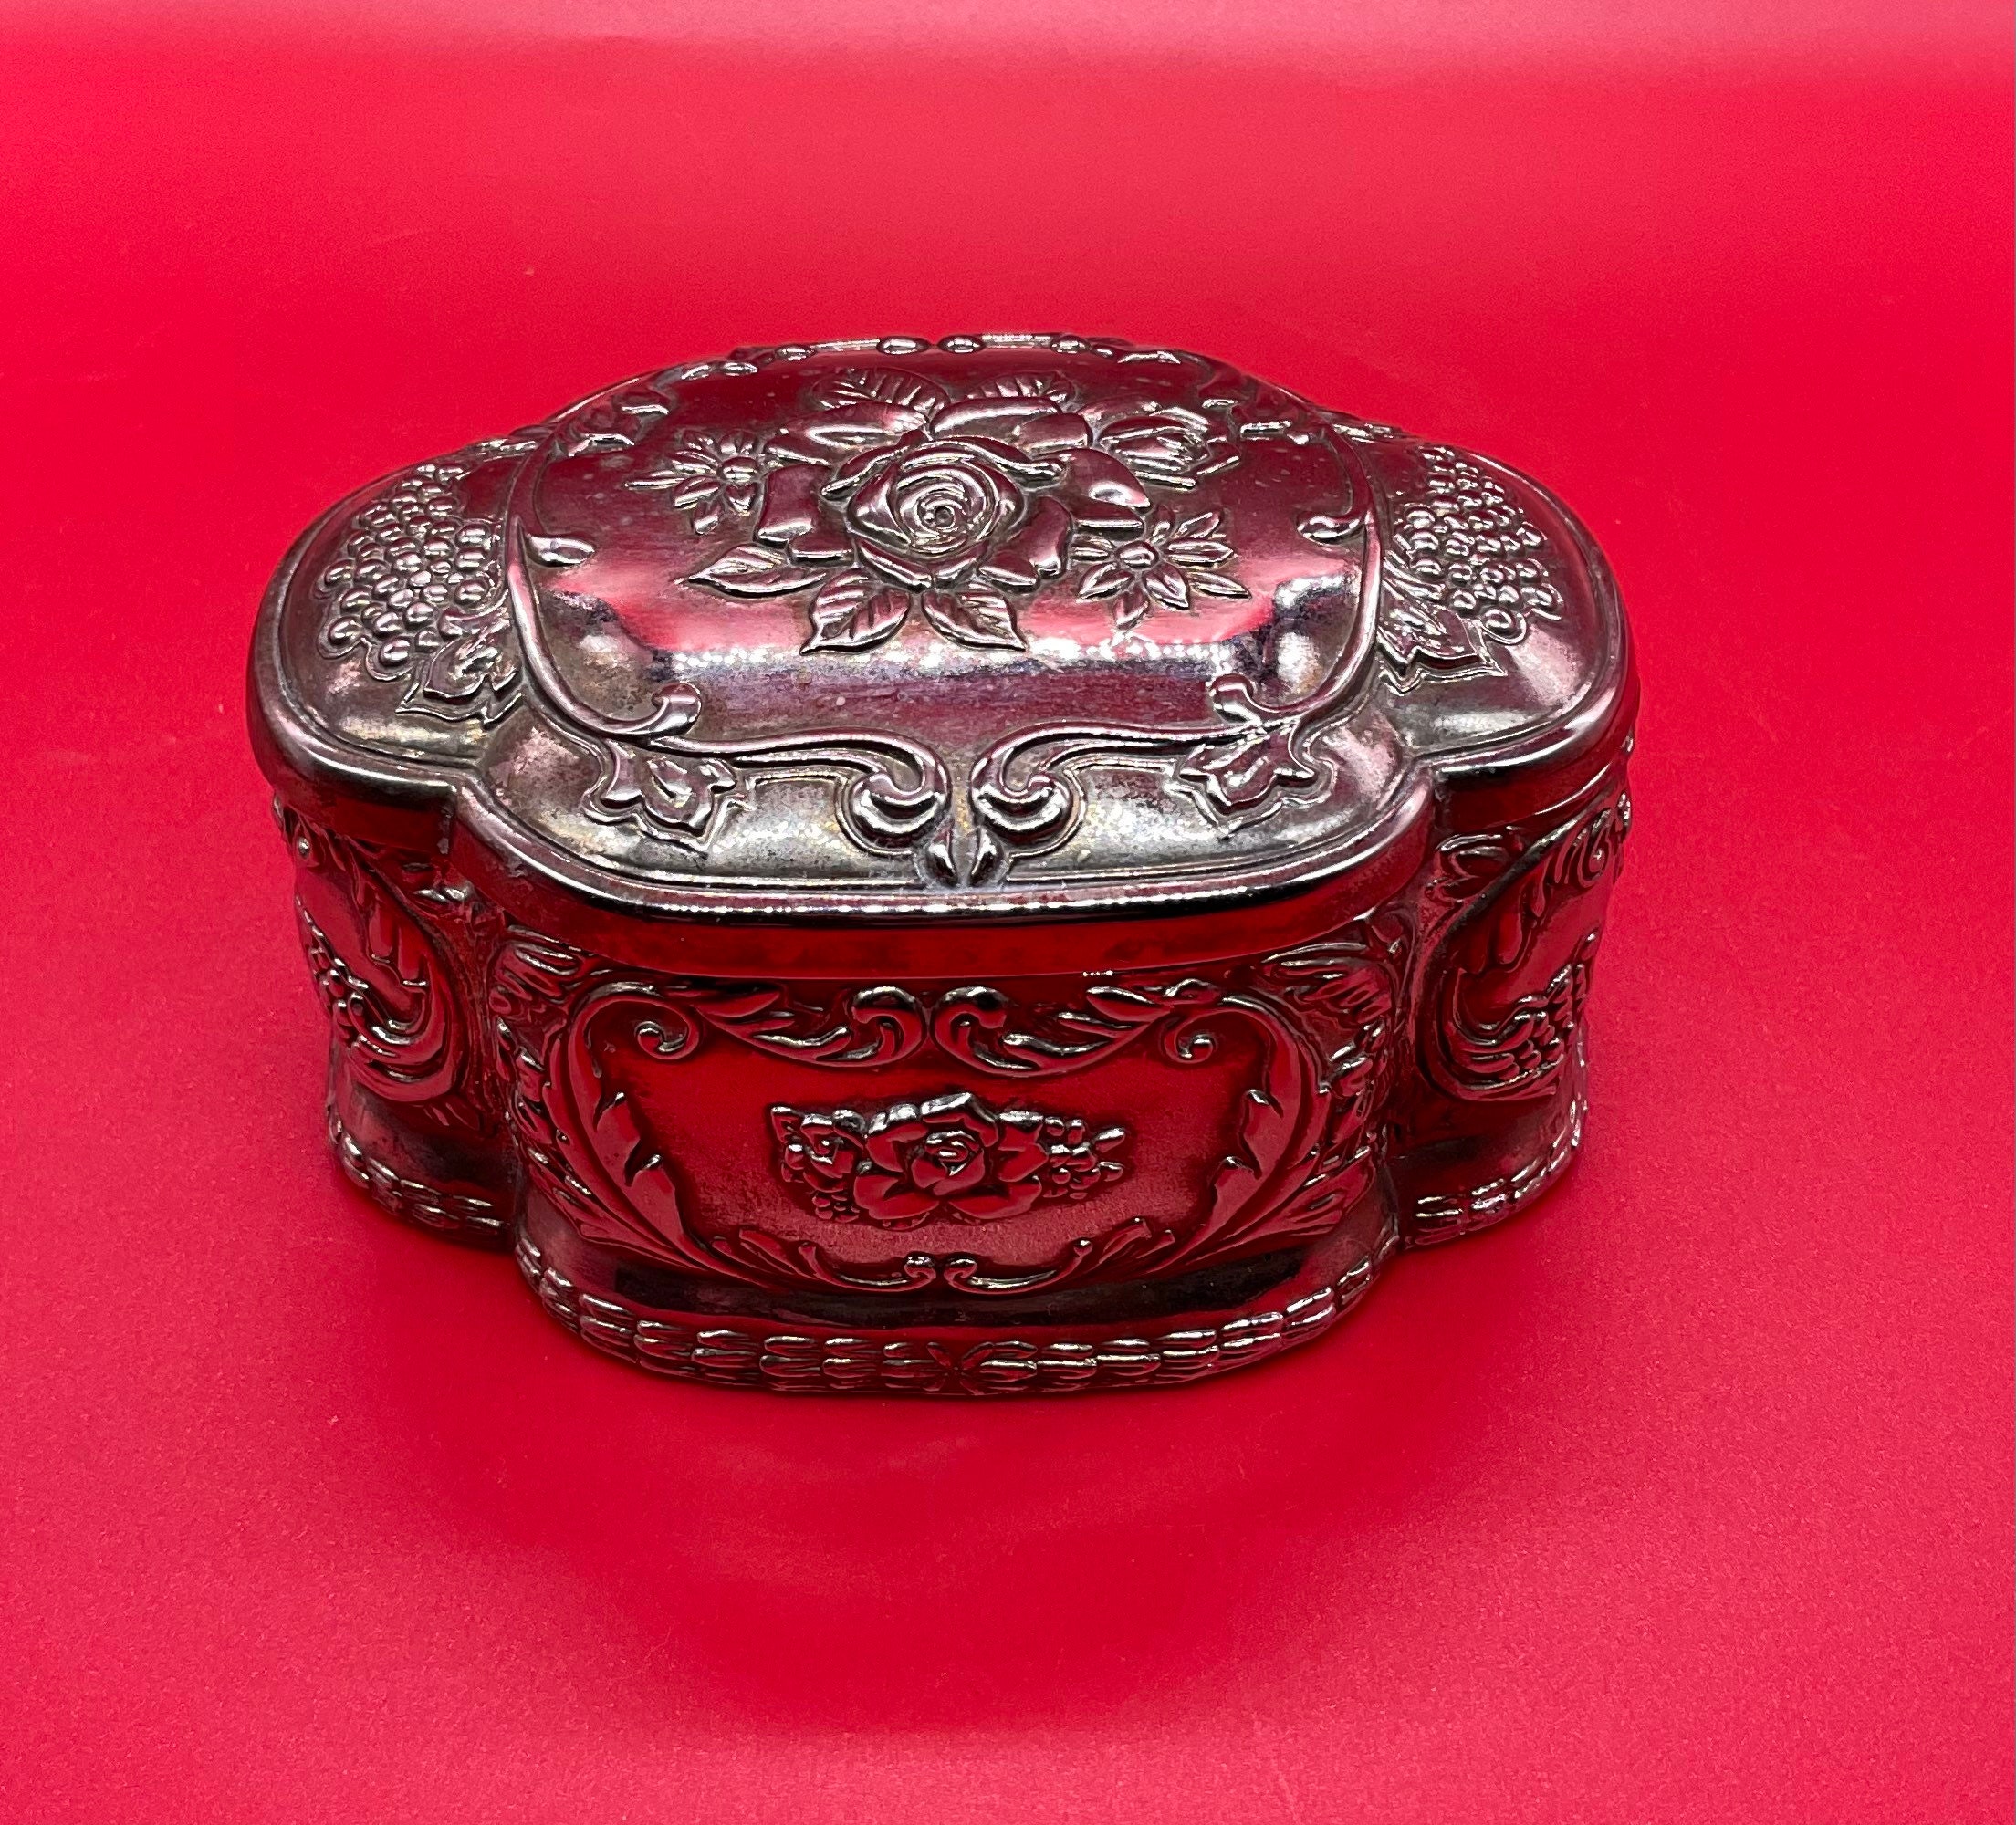 Antique Jewelry Box, Embossed Design Vintage Style Vintage Jewelry Box Rich  Lustre For Jewelry For Earrings For Rings Gold White And Red Roses